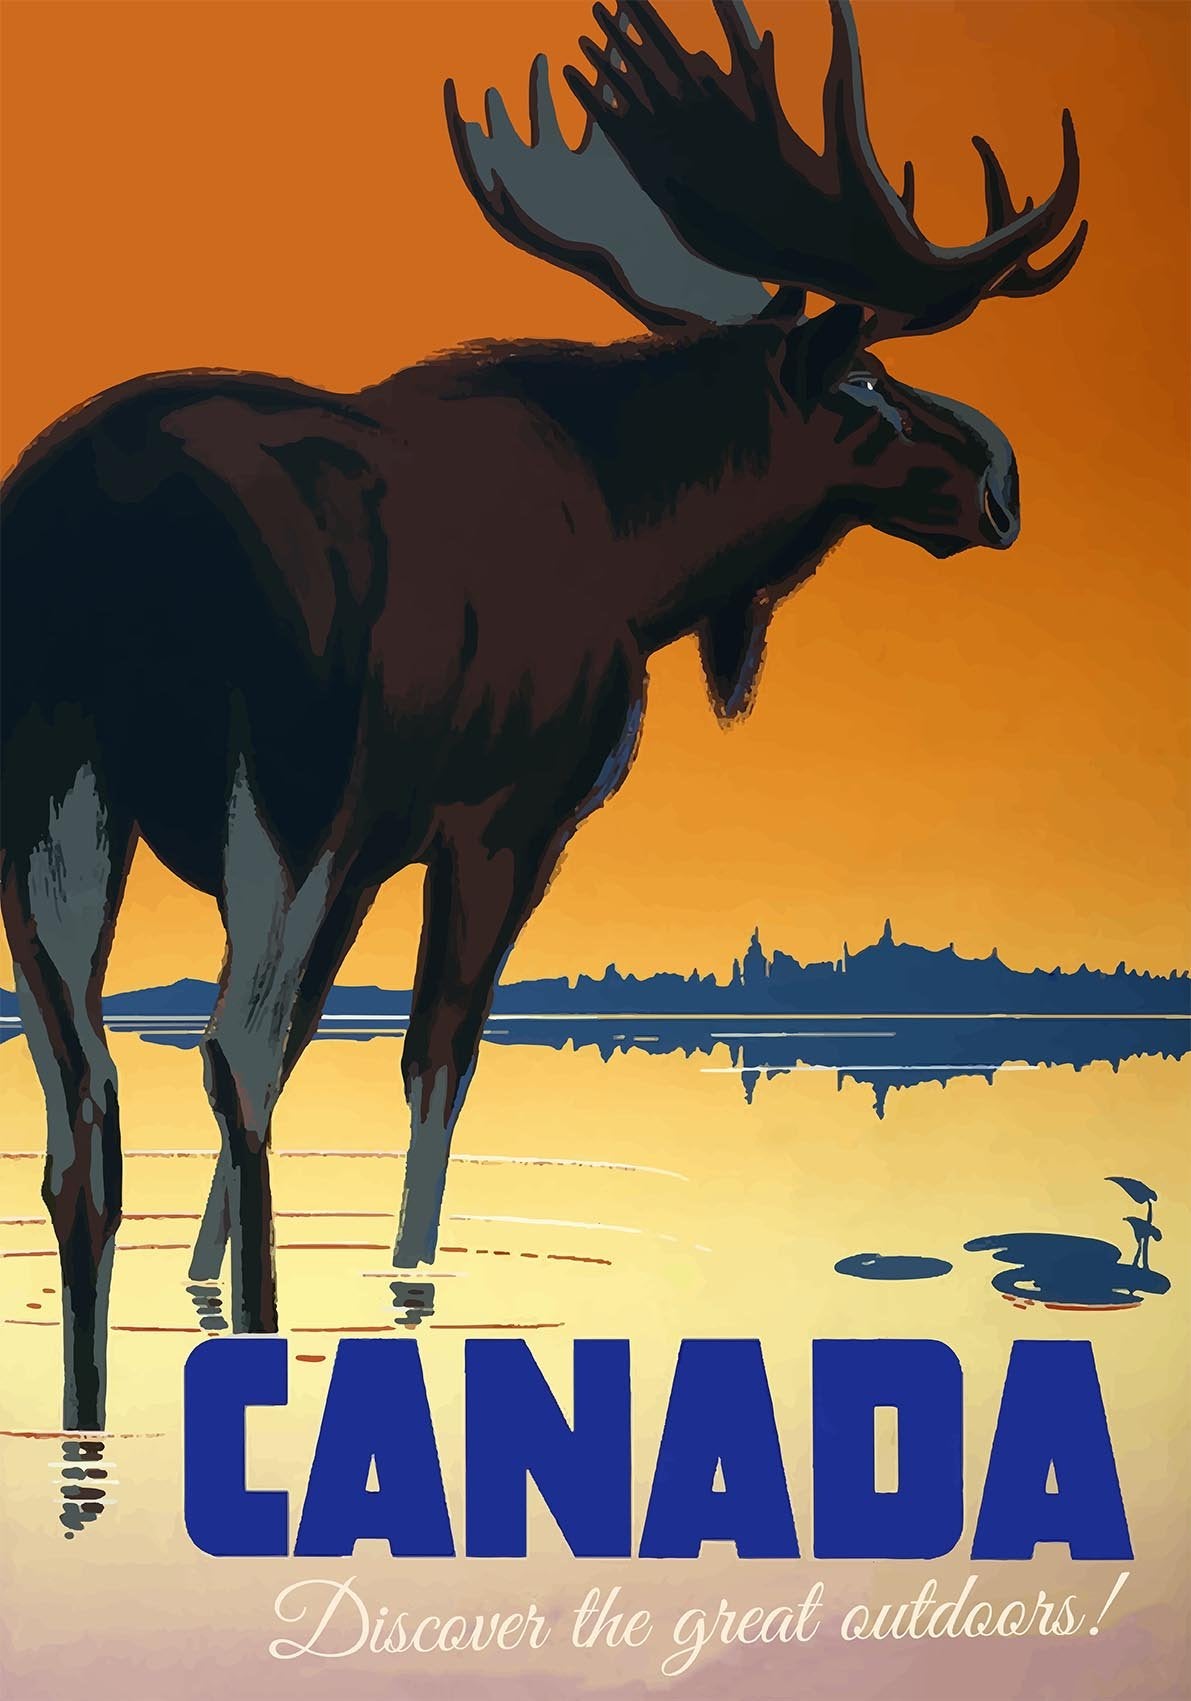 Canada Travel Poster